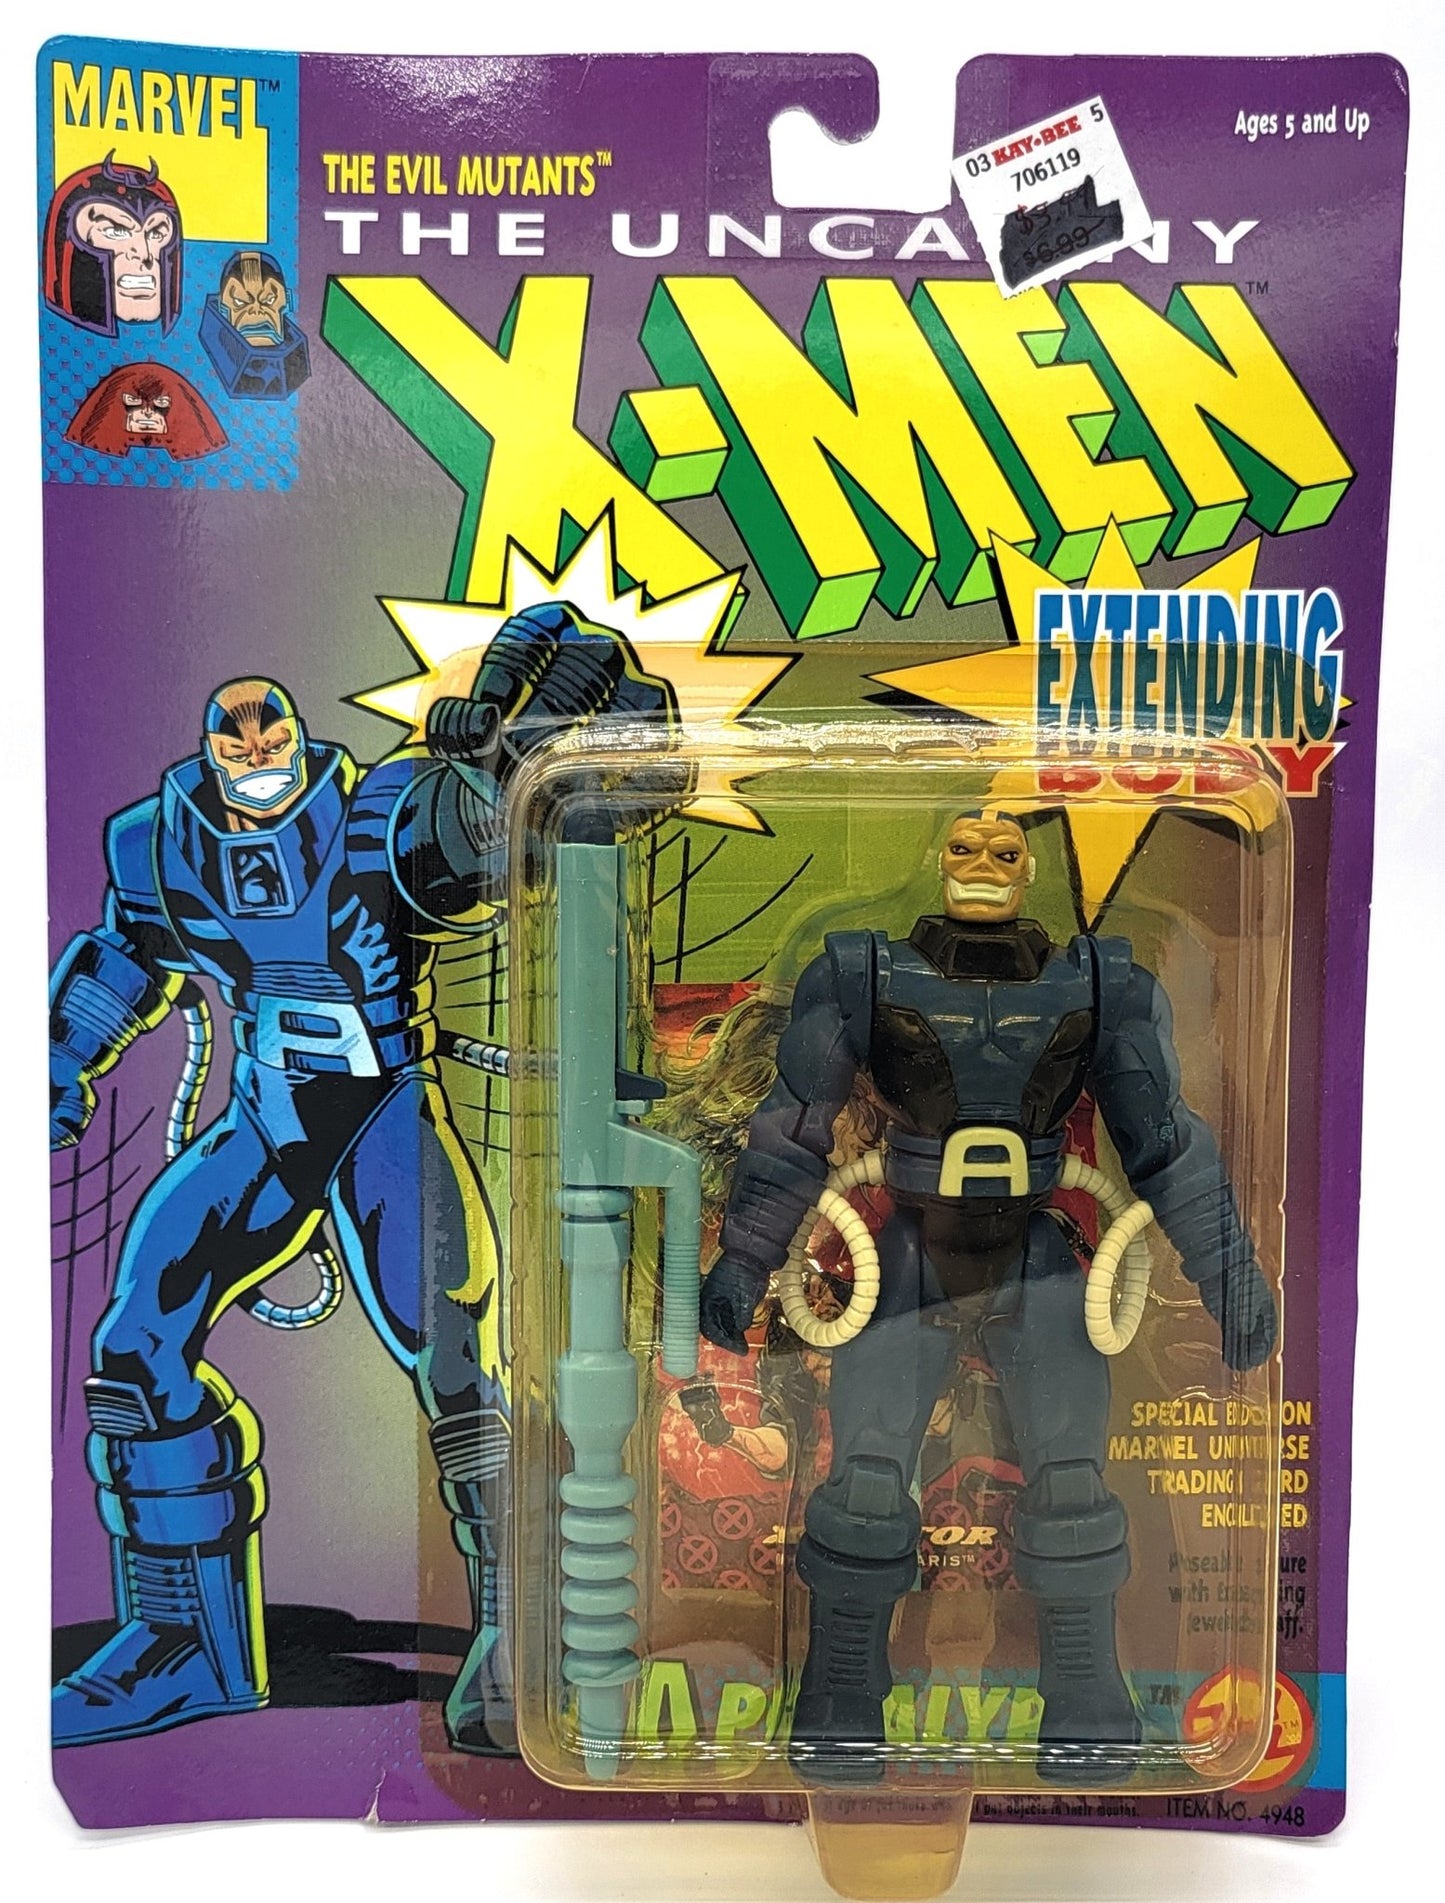 Toy Biz - Toy Biz | The Uncanny X-Men - Apocalypse 1993 | Vintage Action Figure - With Special Edition trading card - Action Figures - Steady Bunny Shop